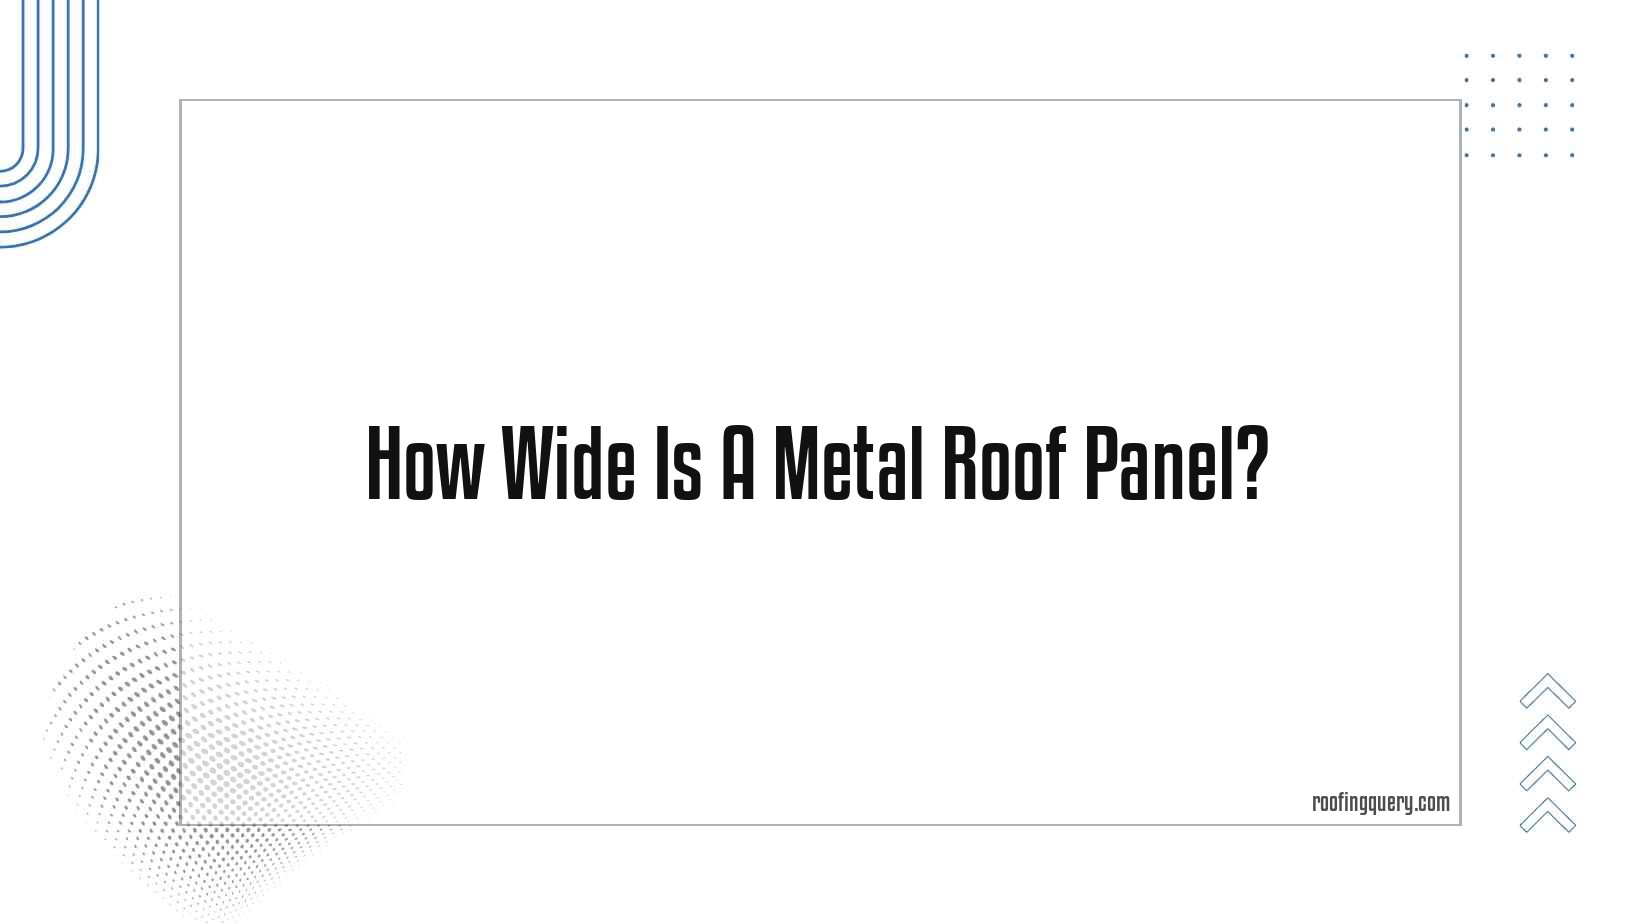 How Wide Is A Metal Roof Panel